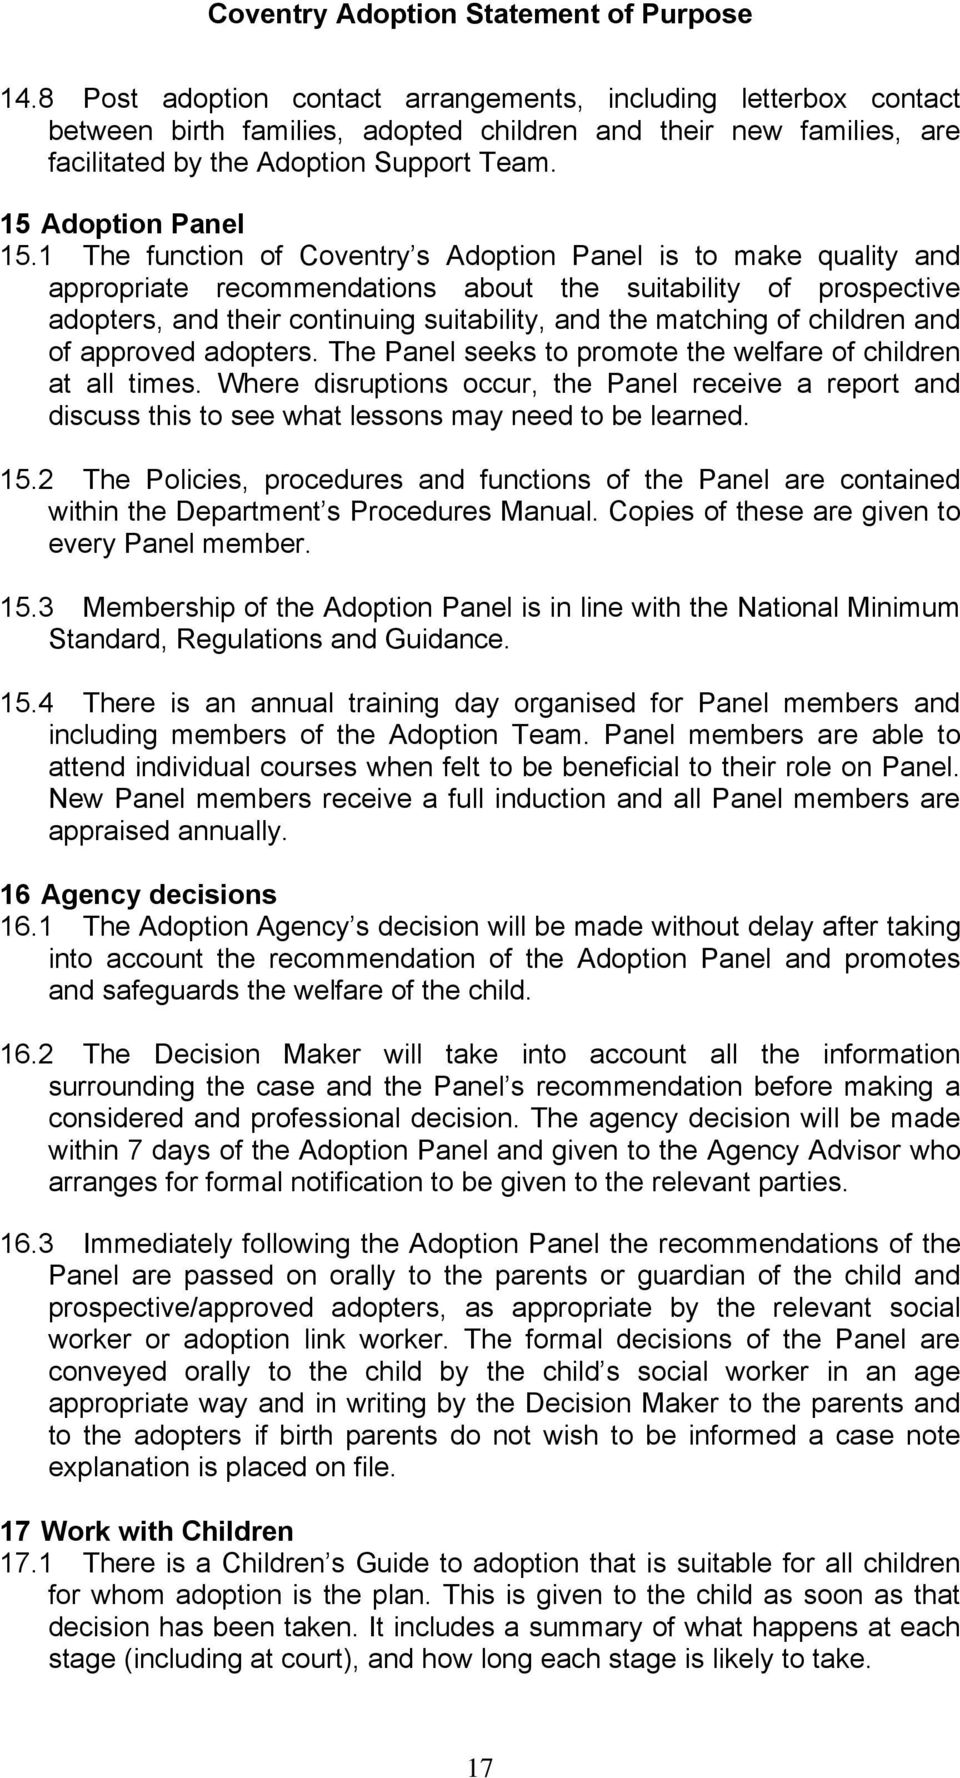 1 The function of Coventry s Adoption Panel is to make quality and appropriate recommendations about the suitability of prospective adopters, and their continuing suitability, and the matching of